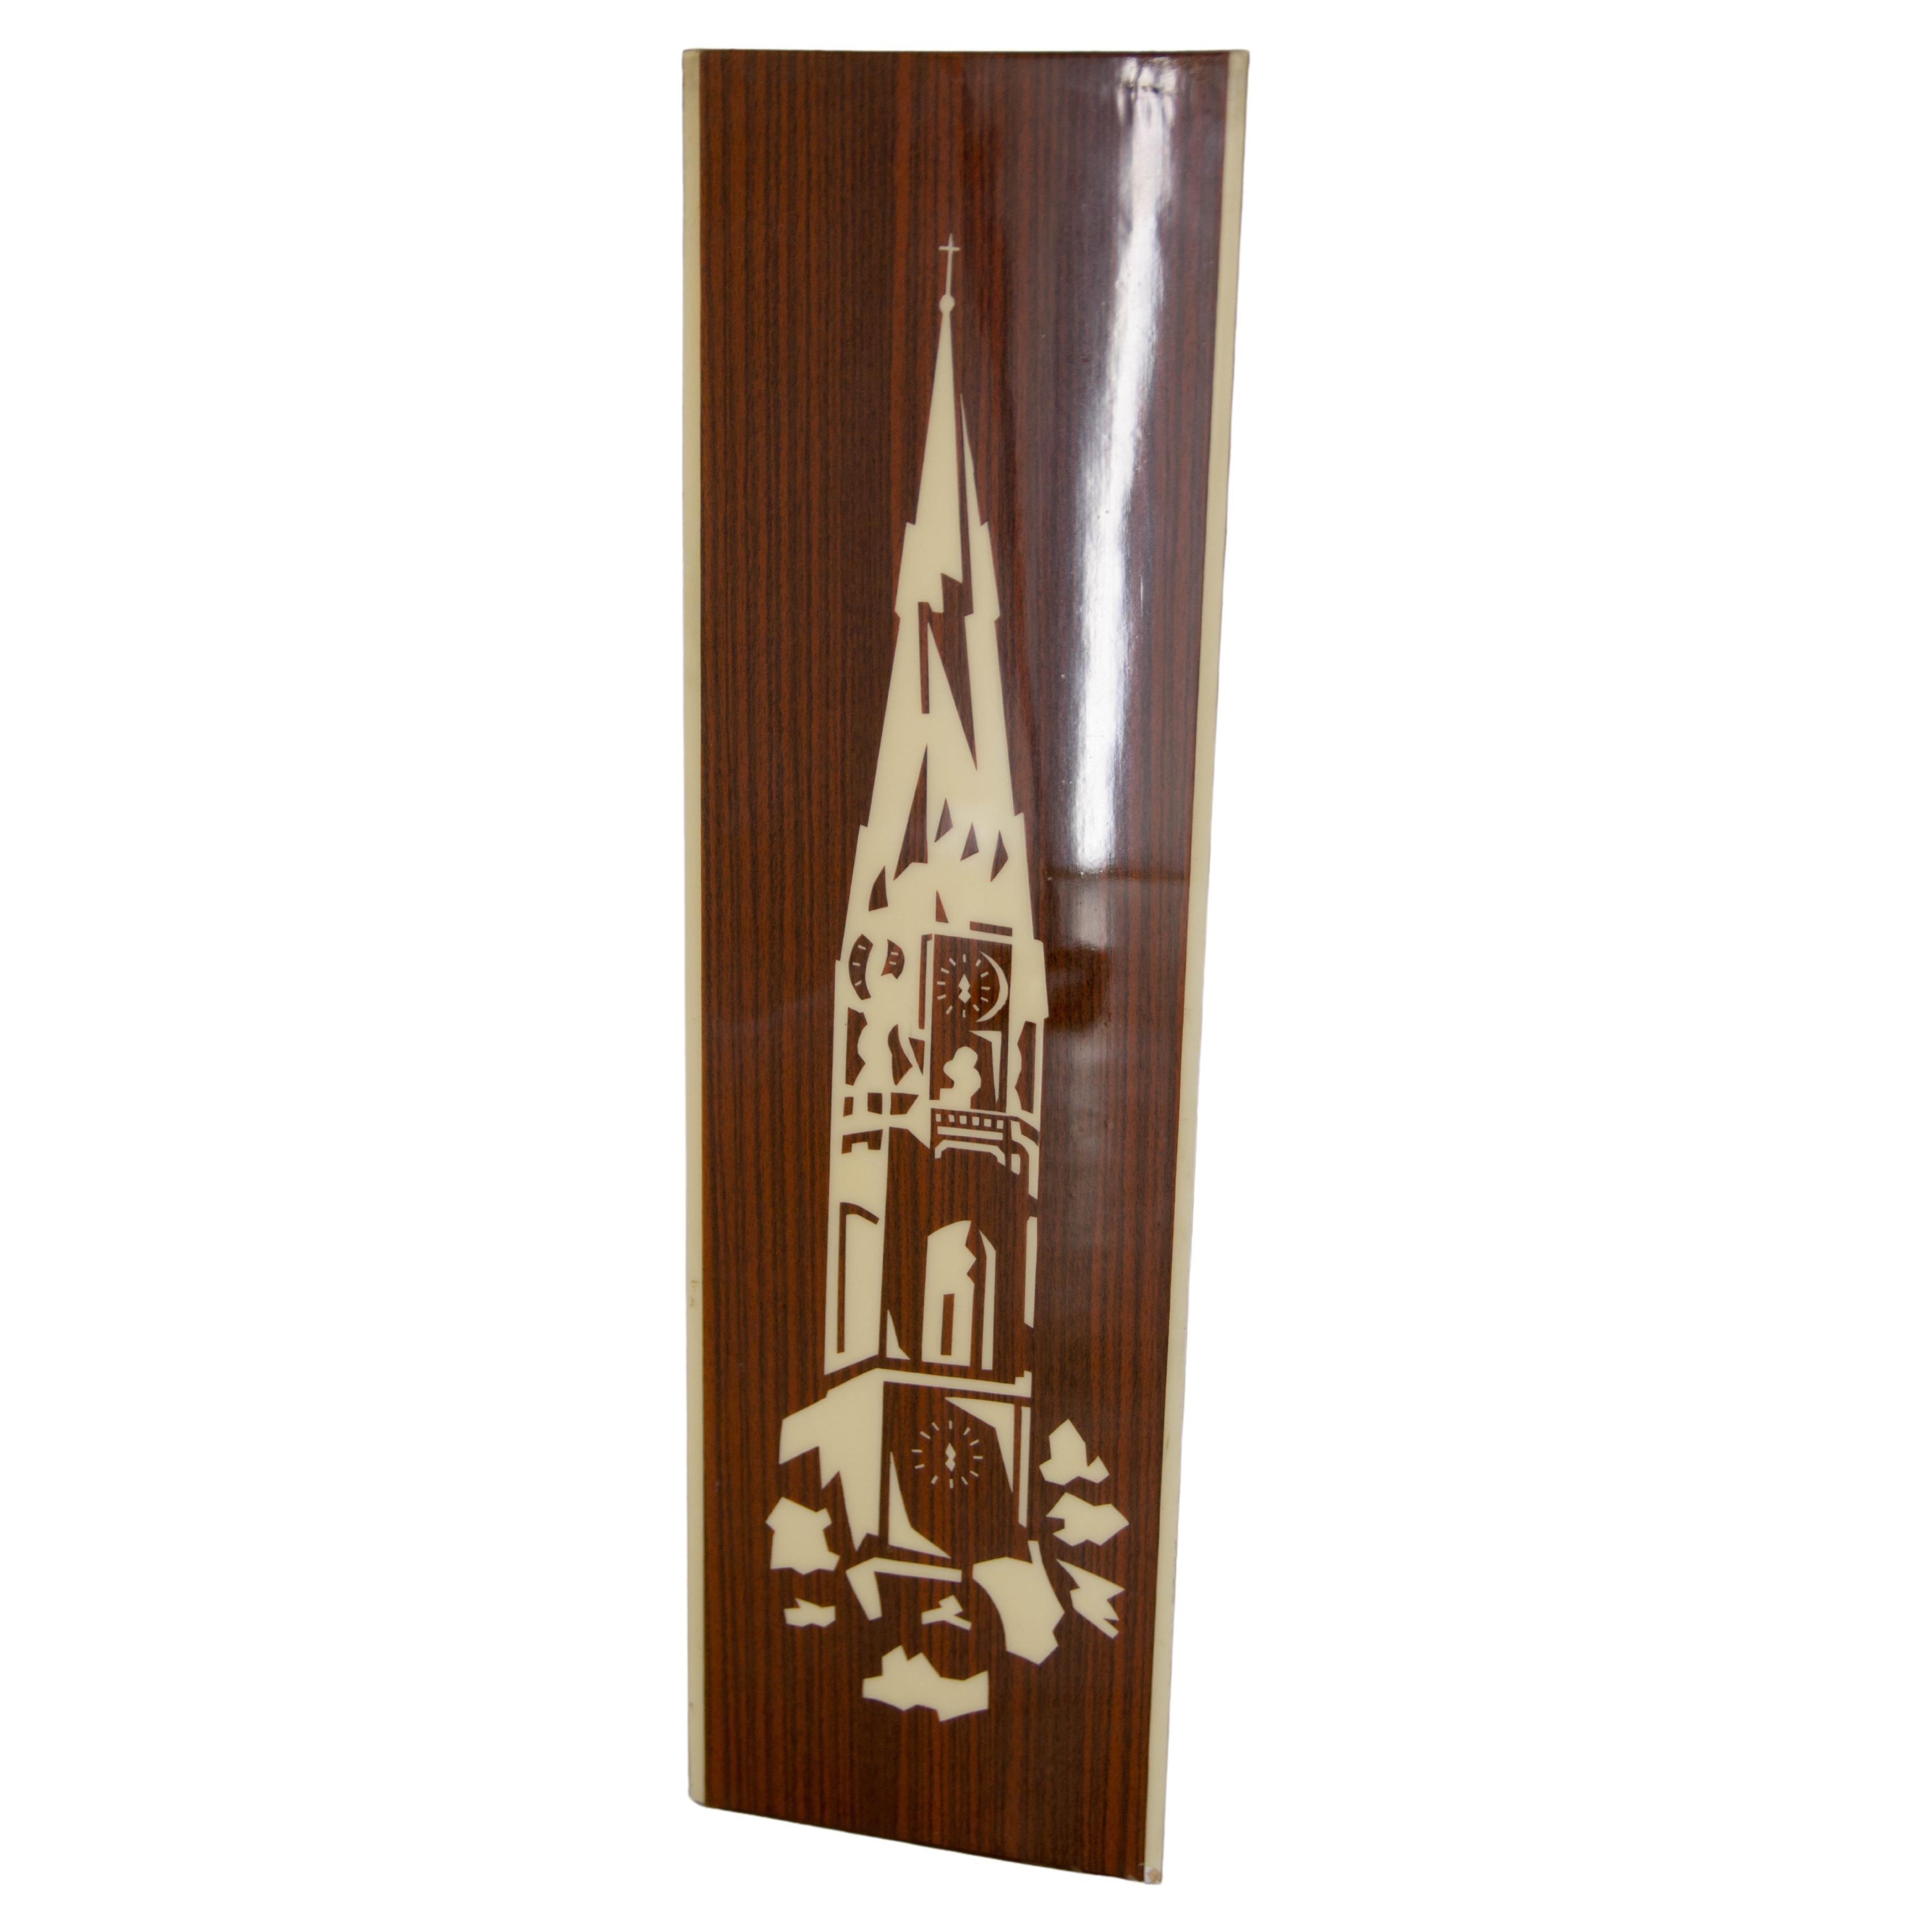 Veneer Image of Church Tower, 1960s For Sale